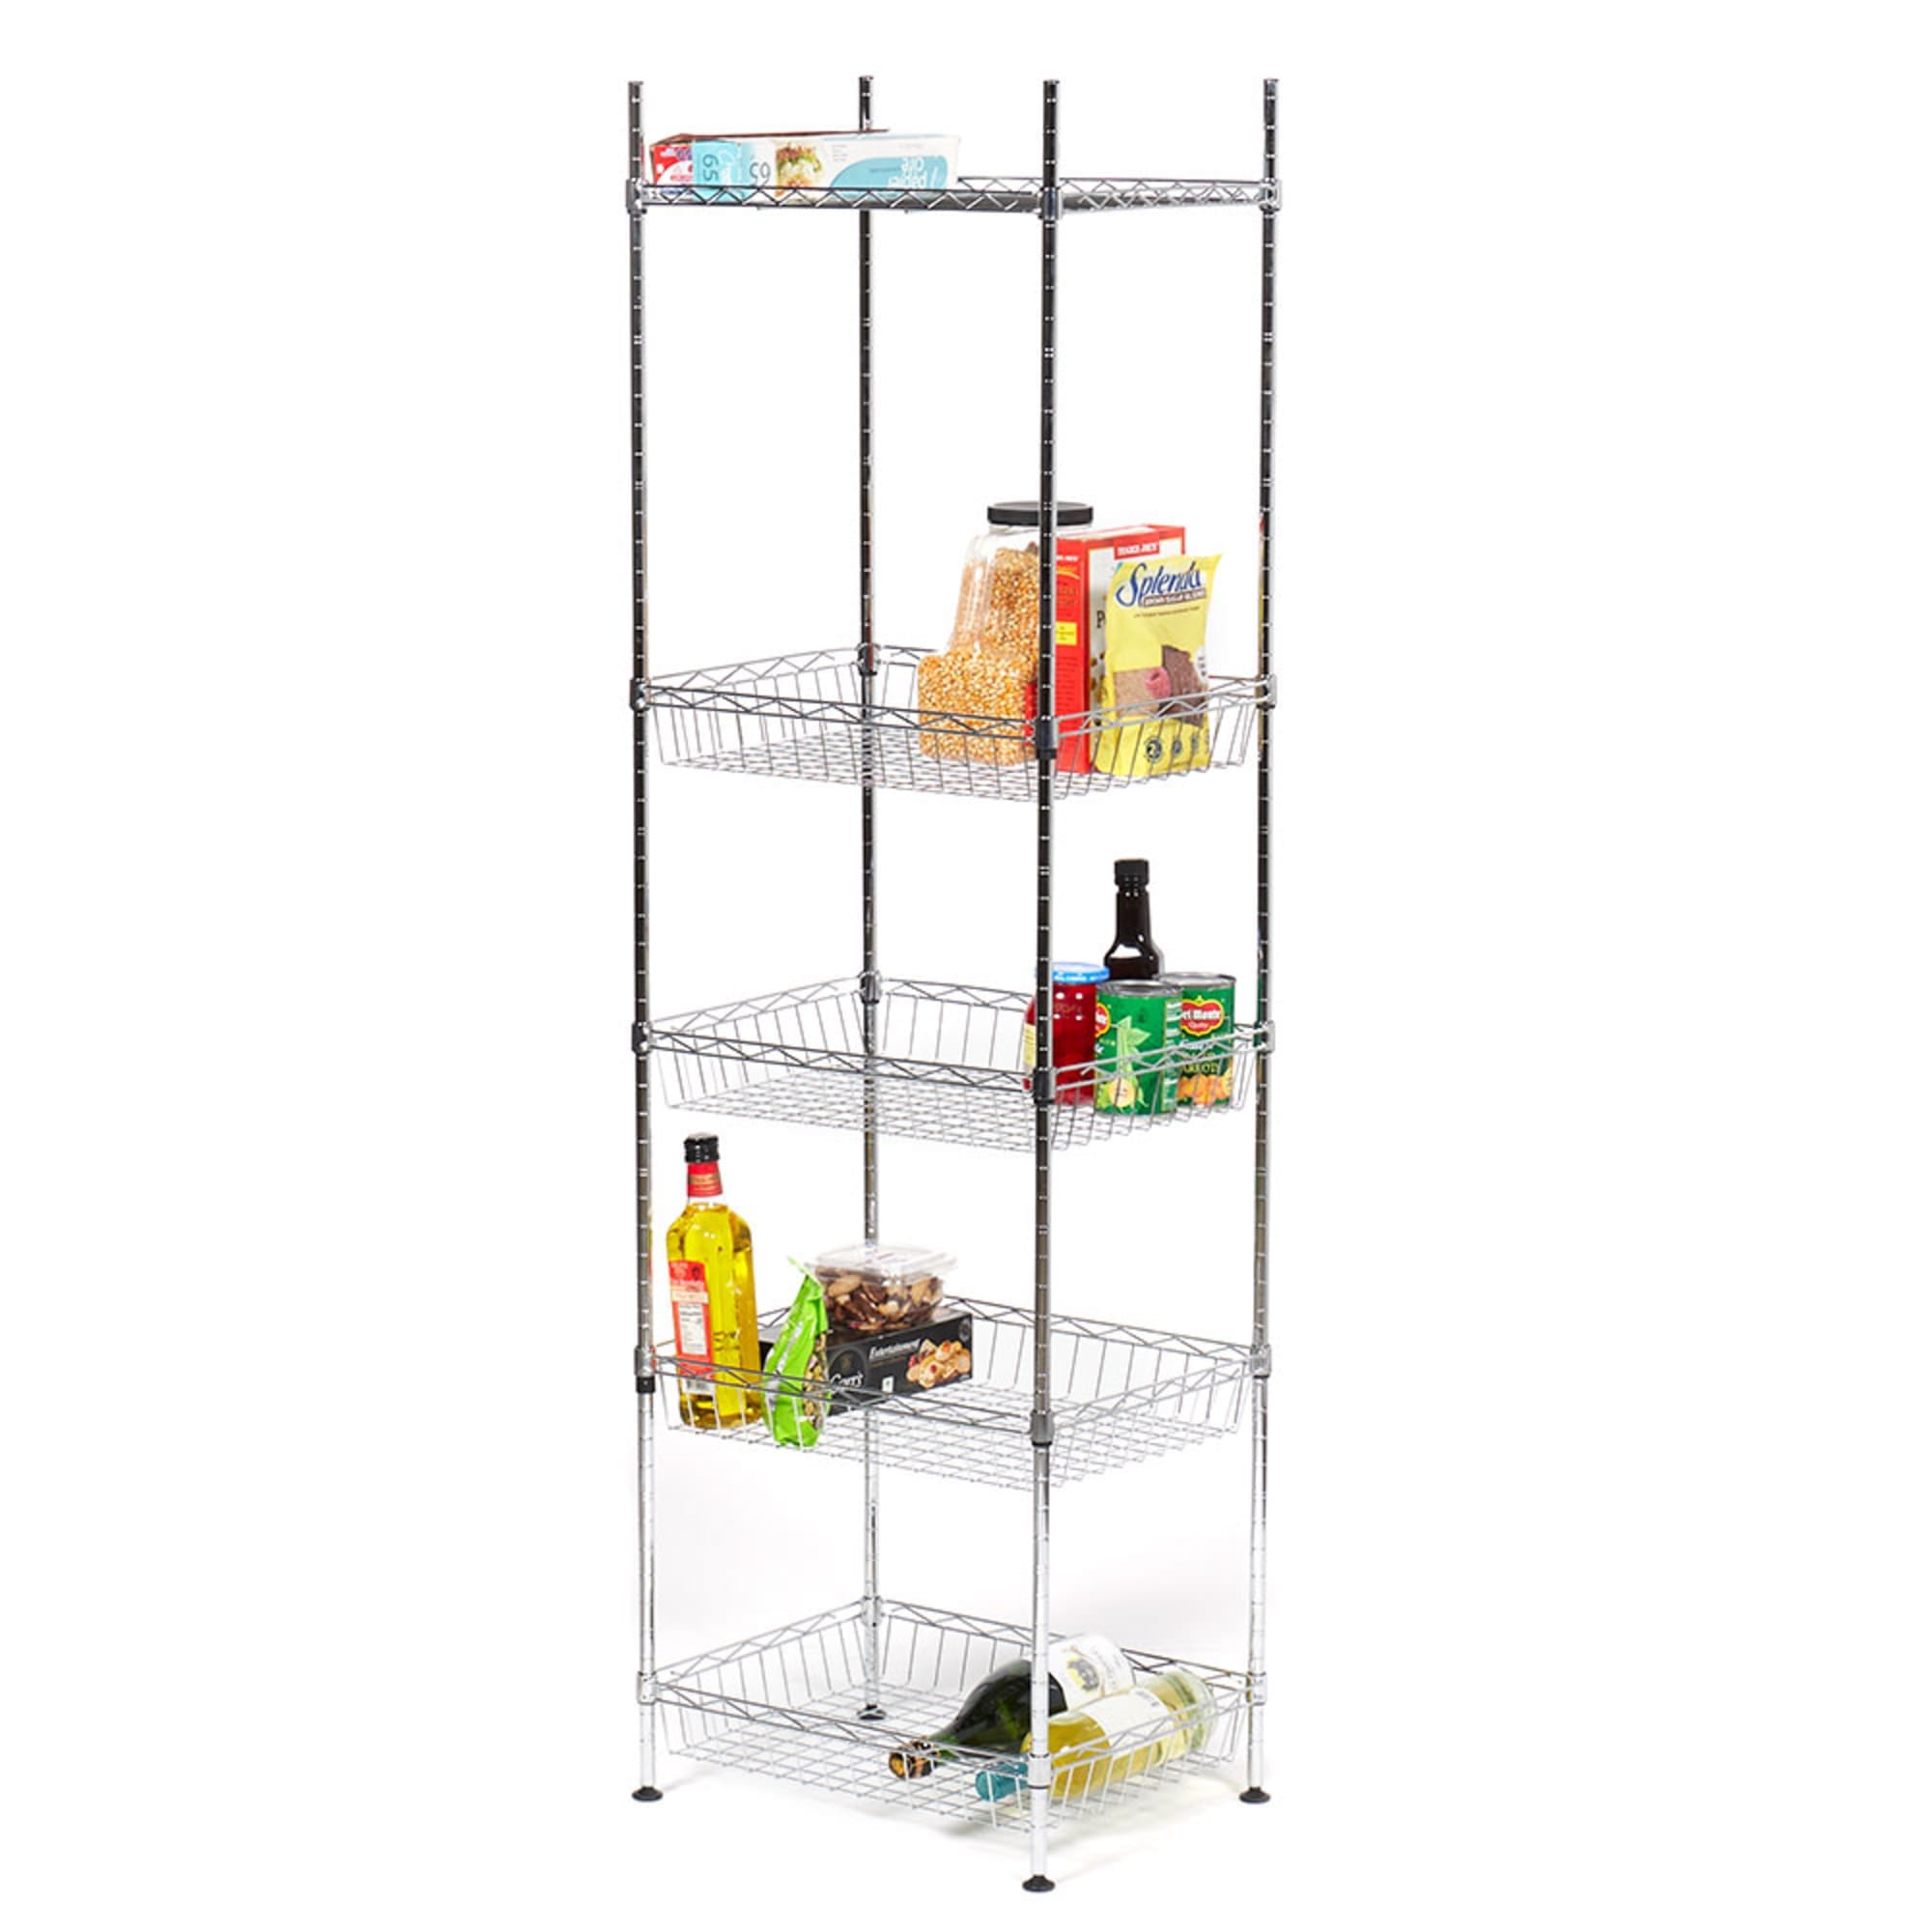 Home Basics 5 Tier Standing Wire Baskets, Chrome $50.00 EACH, CASE PACK OF 1